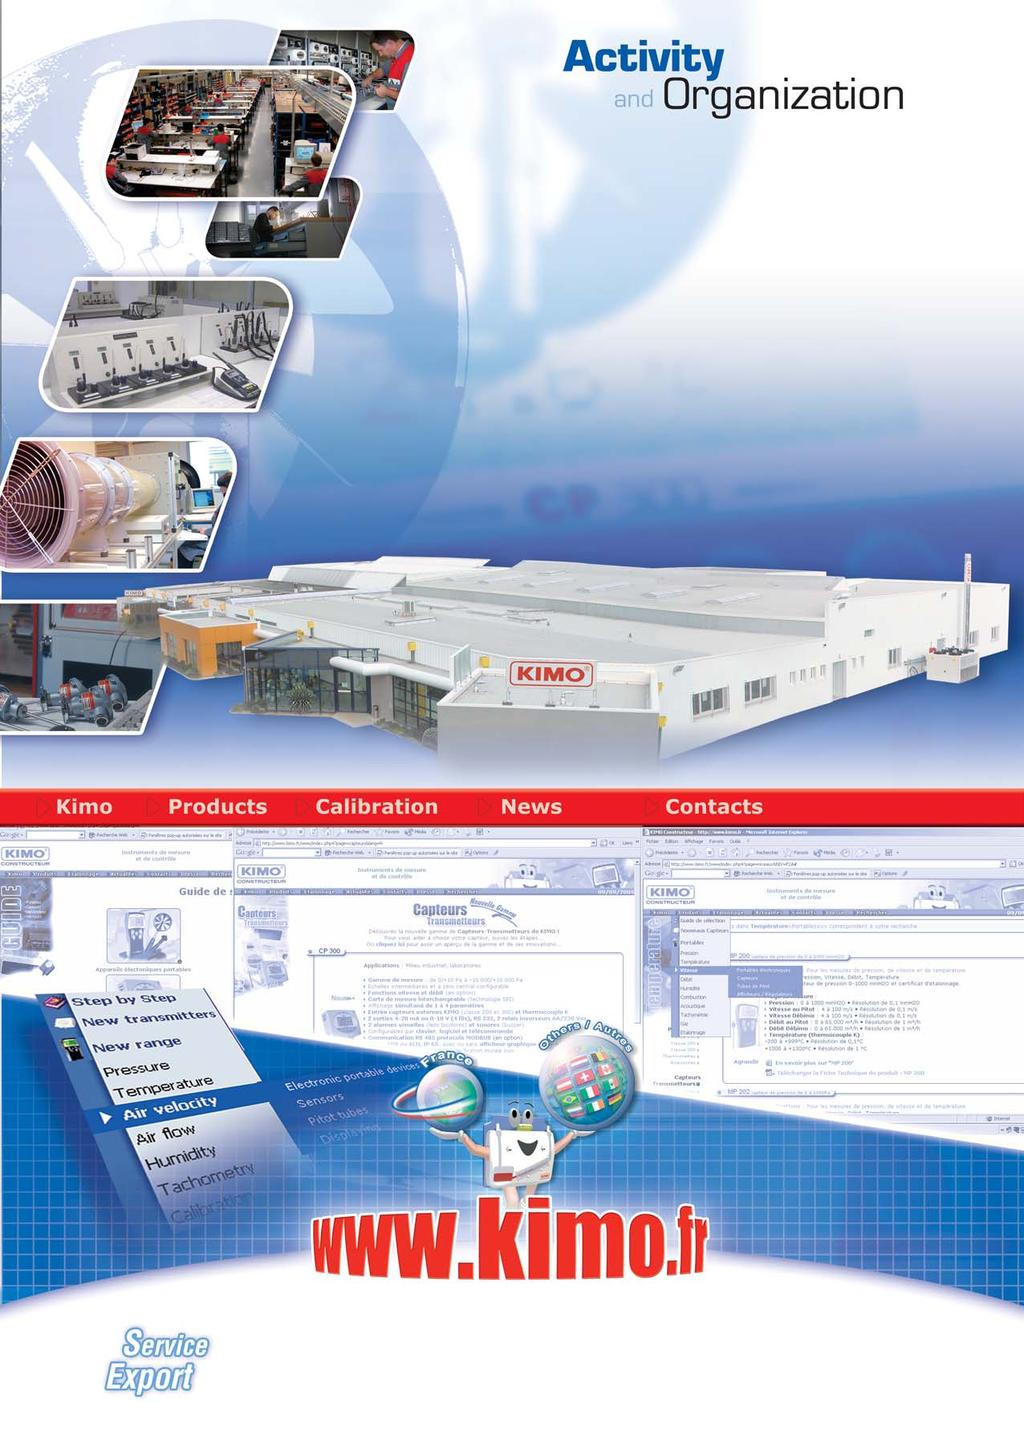 KIMO designs, manufactures and sells instruments for measuring and monitoring air parameters in HVAC and industry.